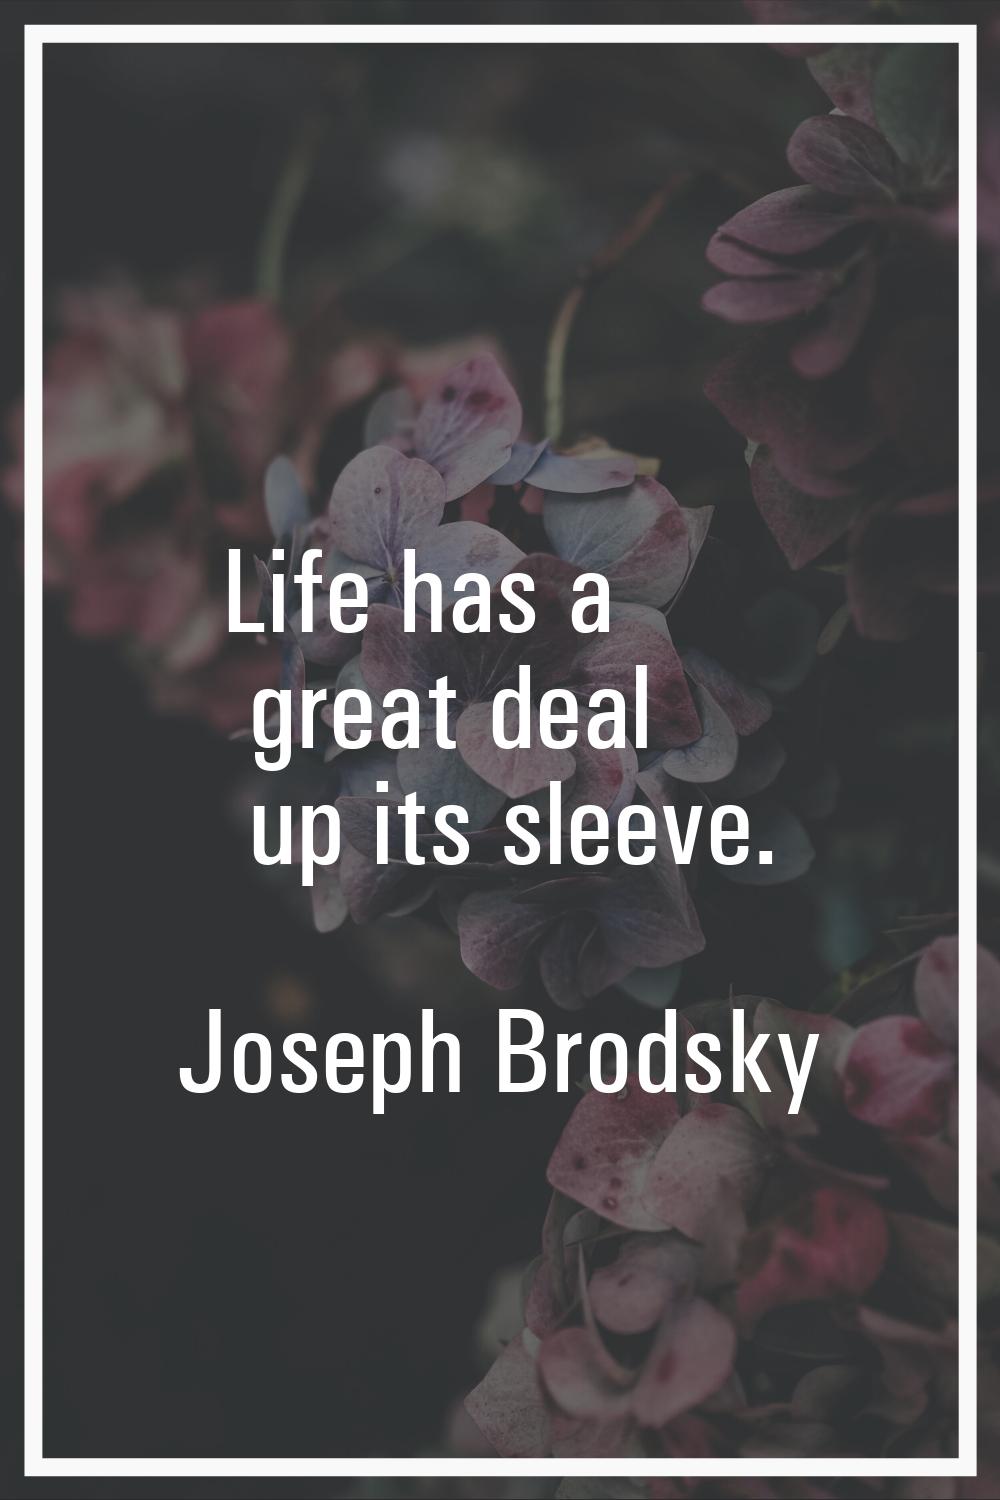 Life has a great deal up its sleeve.